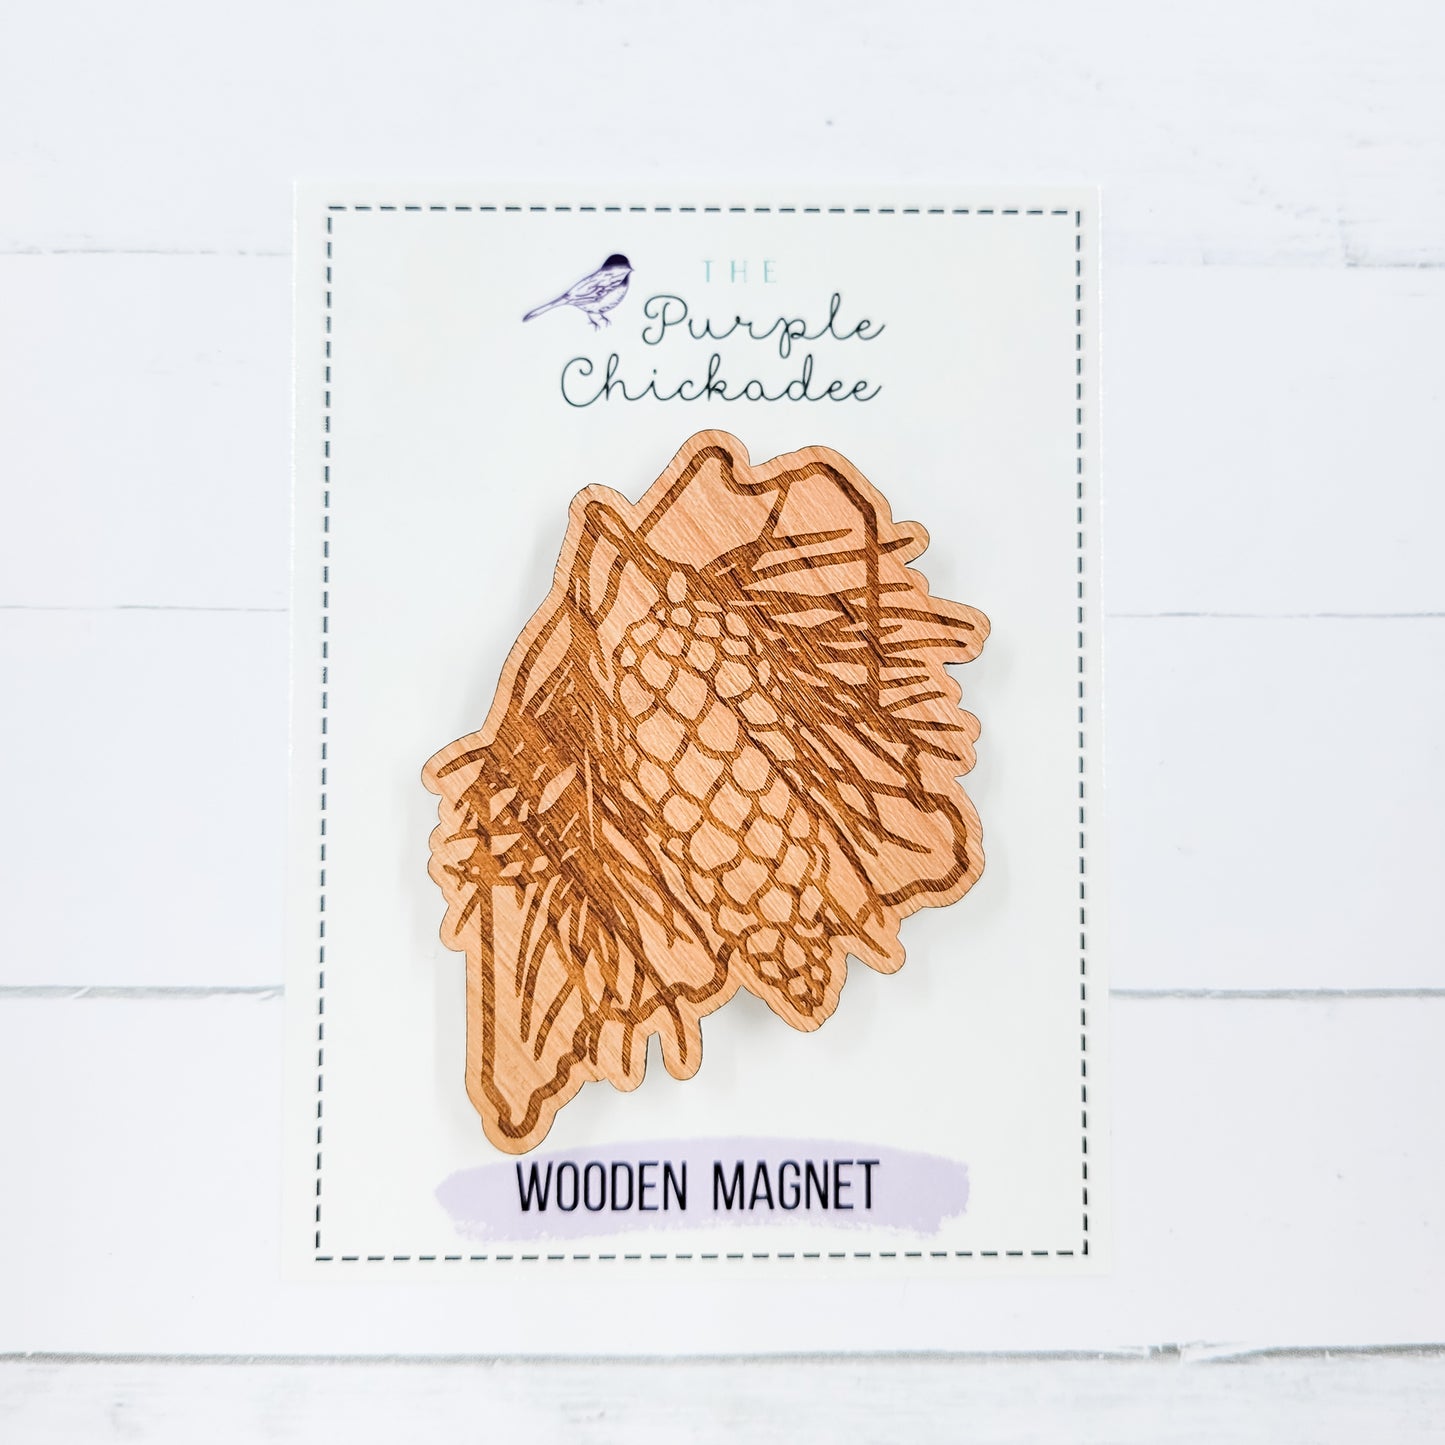 State Flower Shaped Wooden Magnets - Choose Your State